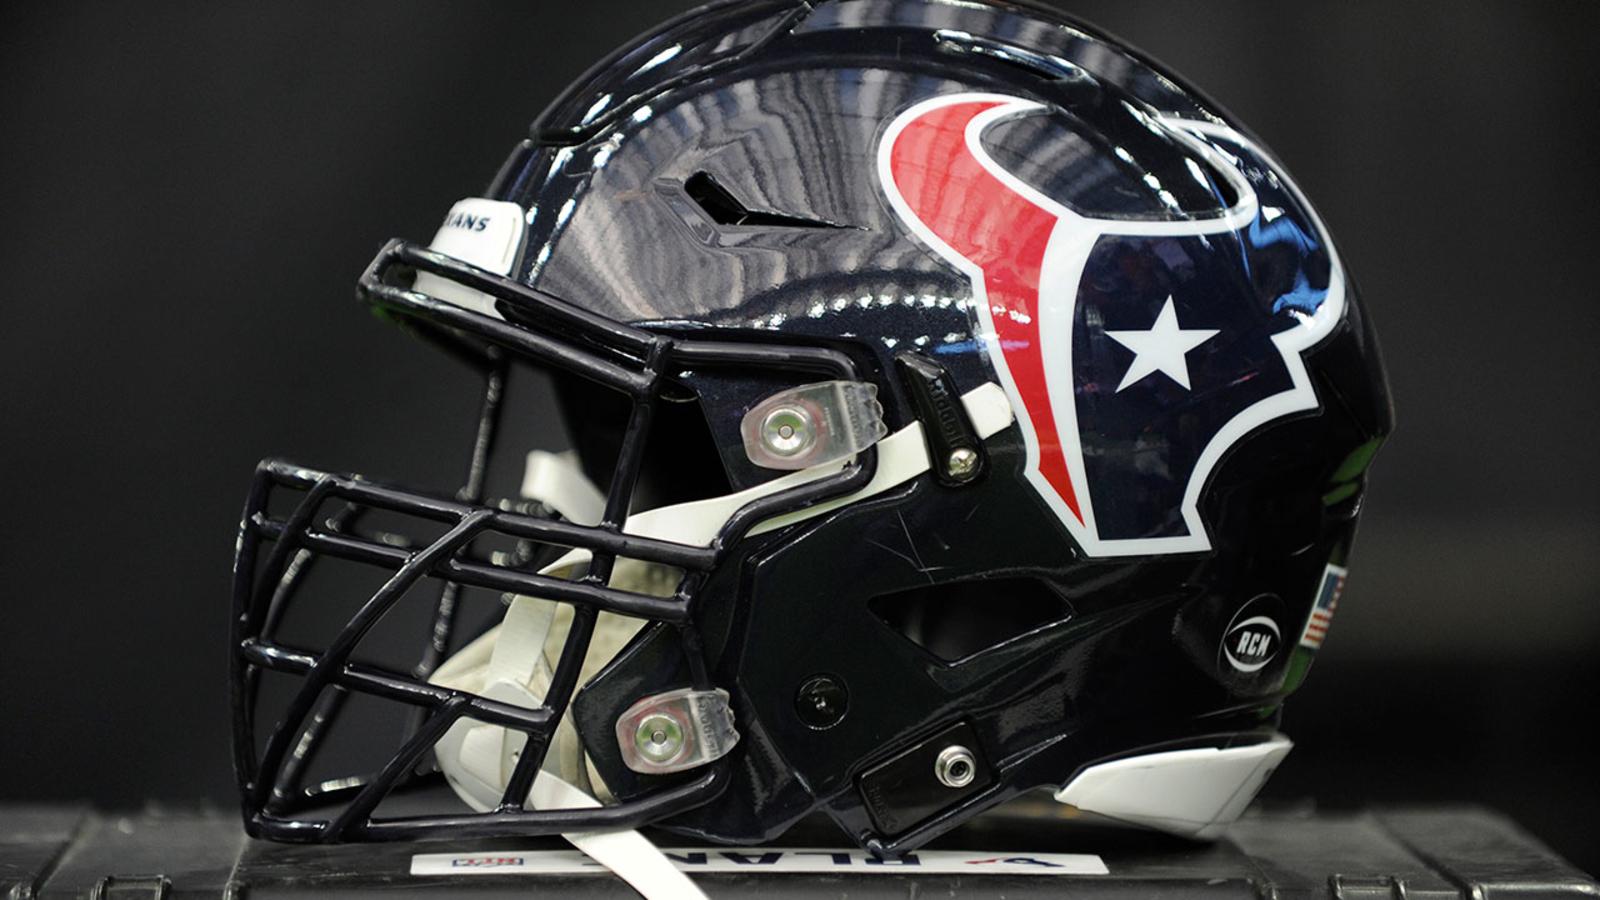 Houston Texans 2019 training camp schedule includes 6 sessions open